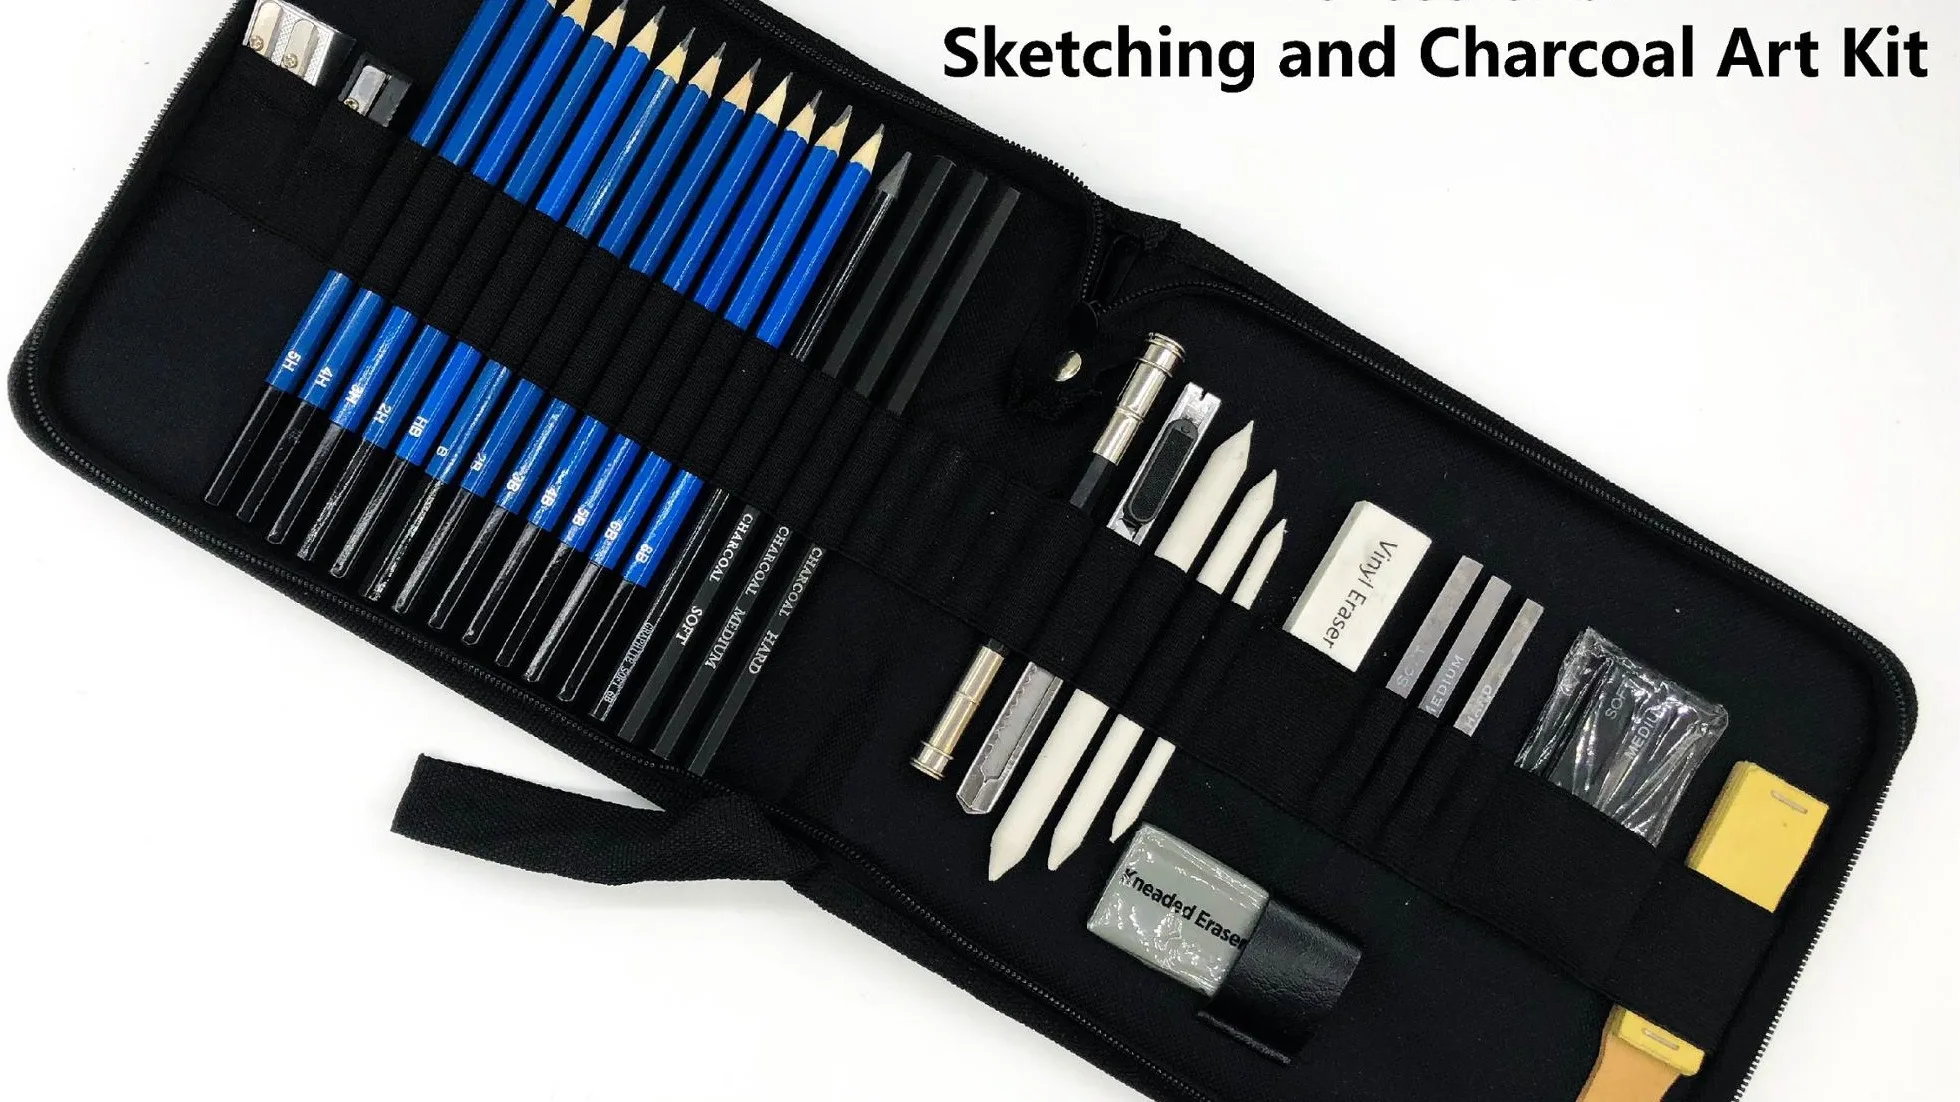 Professional 33pcs Sketch And Draw Pencil Set For Sketching And Drawing In  Nylon Case For Artist And Beginner - Buy Skething And Drawing